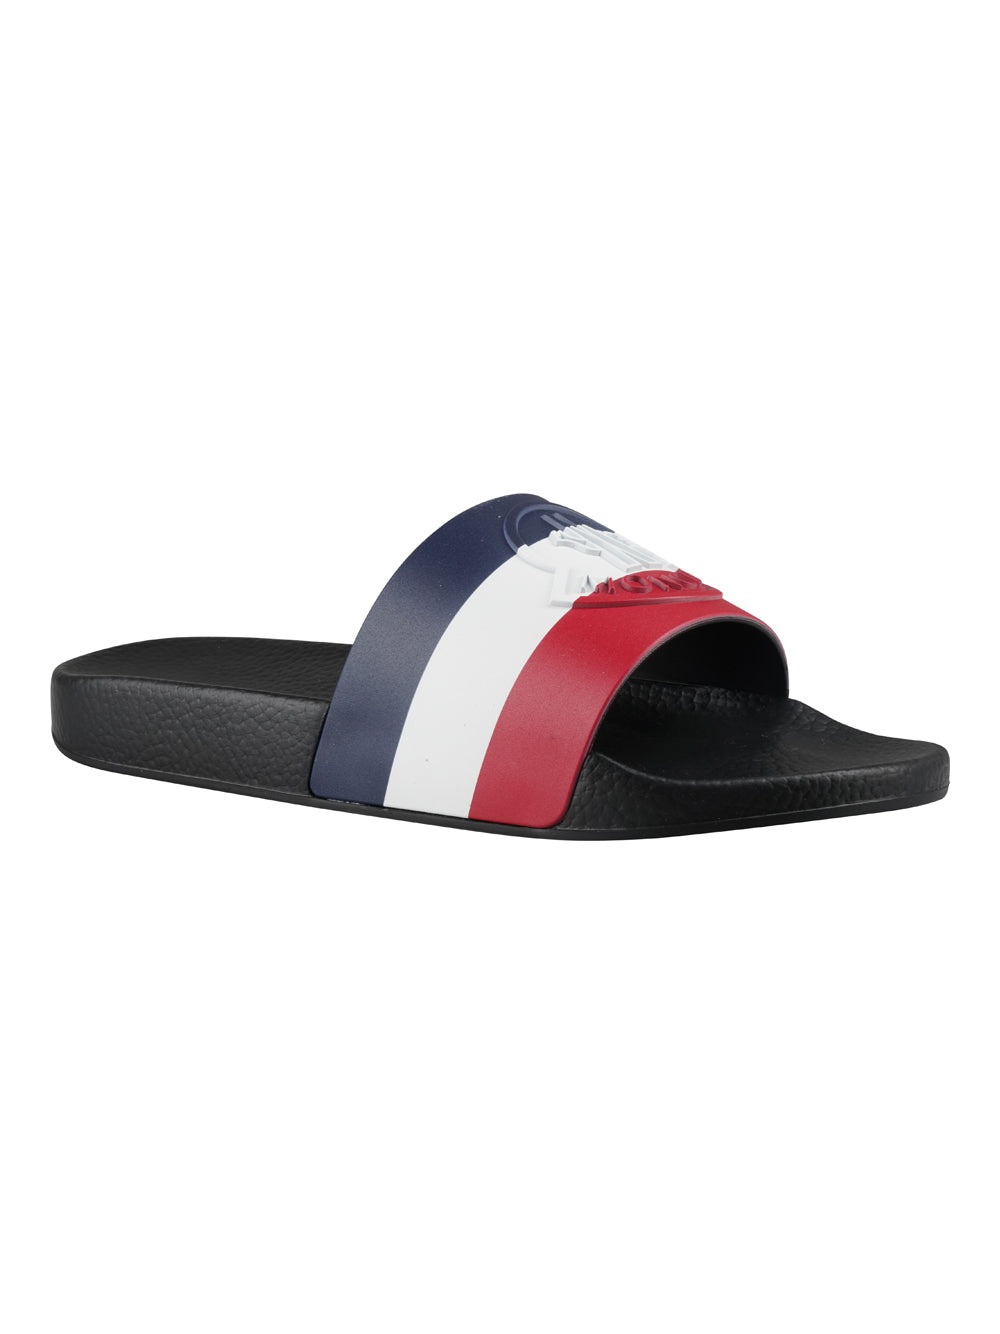 MONCLER MULTICOLOR SLIPPERS - 15